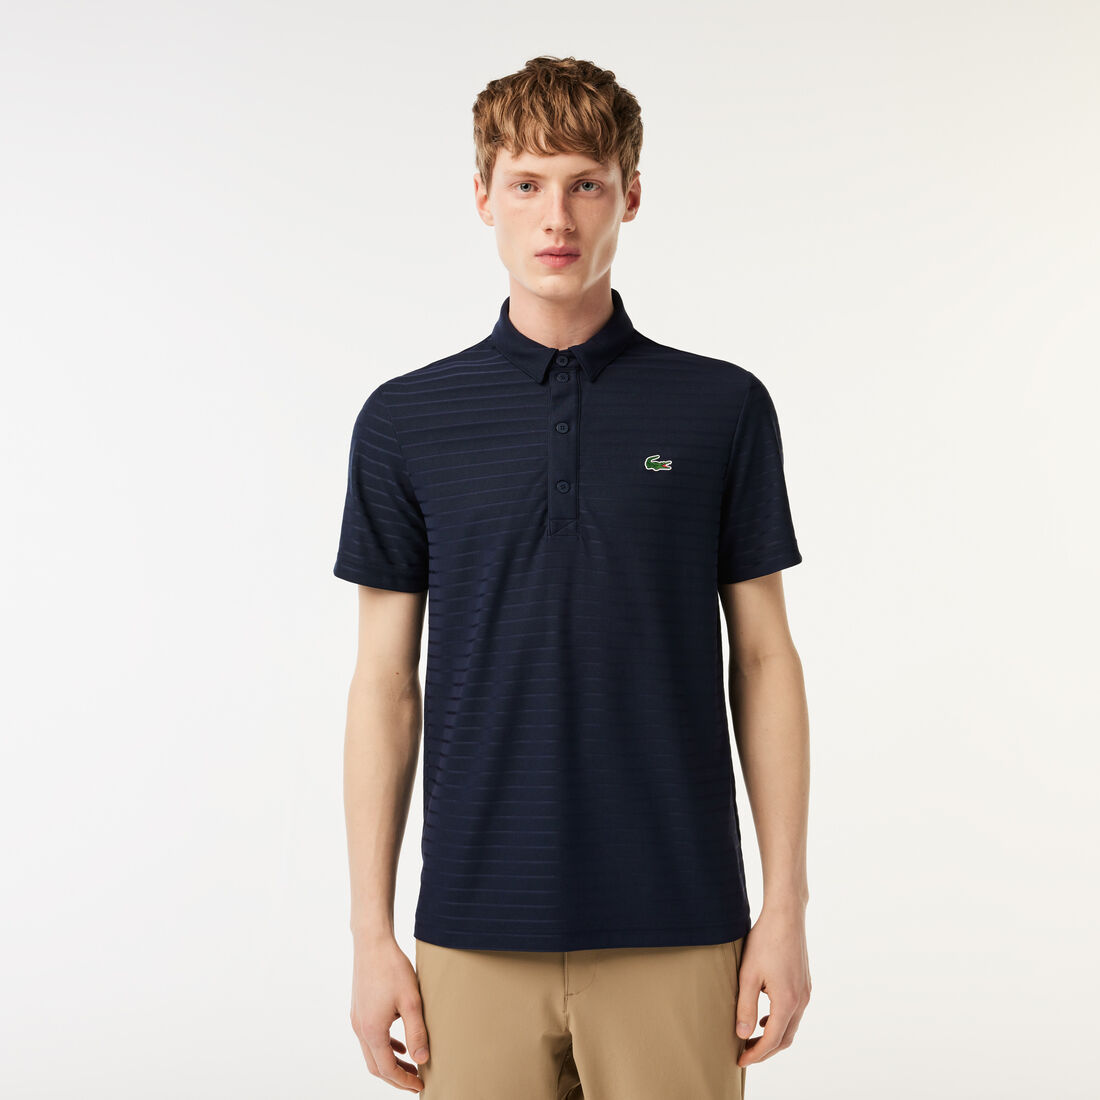 Men's Lacoste SPORT Textured Breathable Golf Polo Shirt - DH6844-00-166